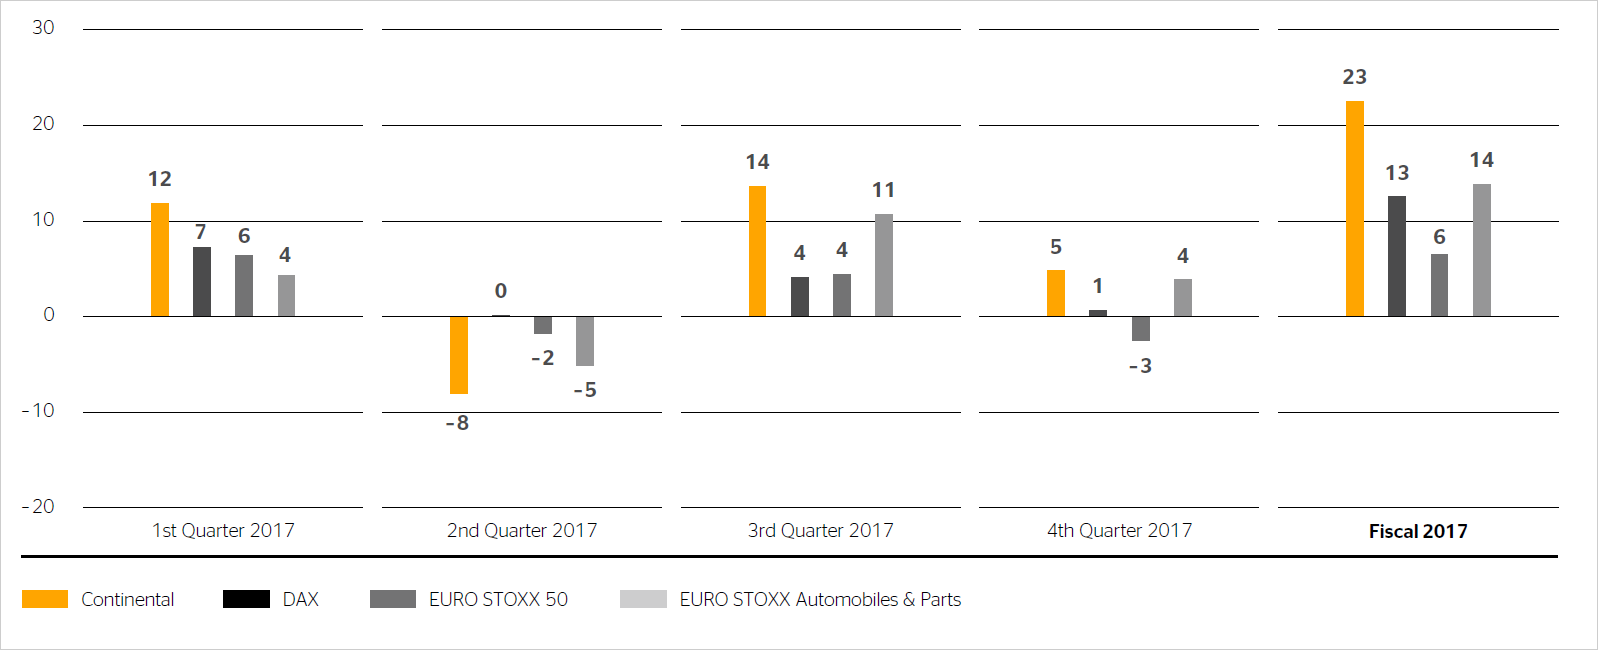 Price performance by quarter in 2017